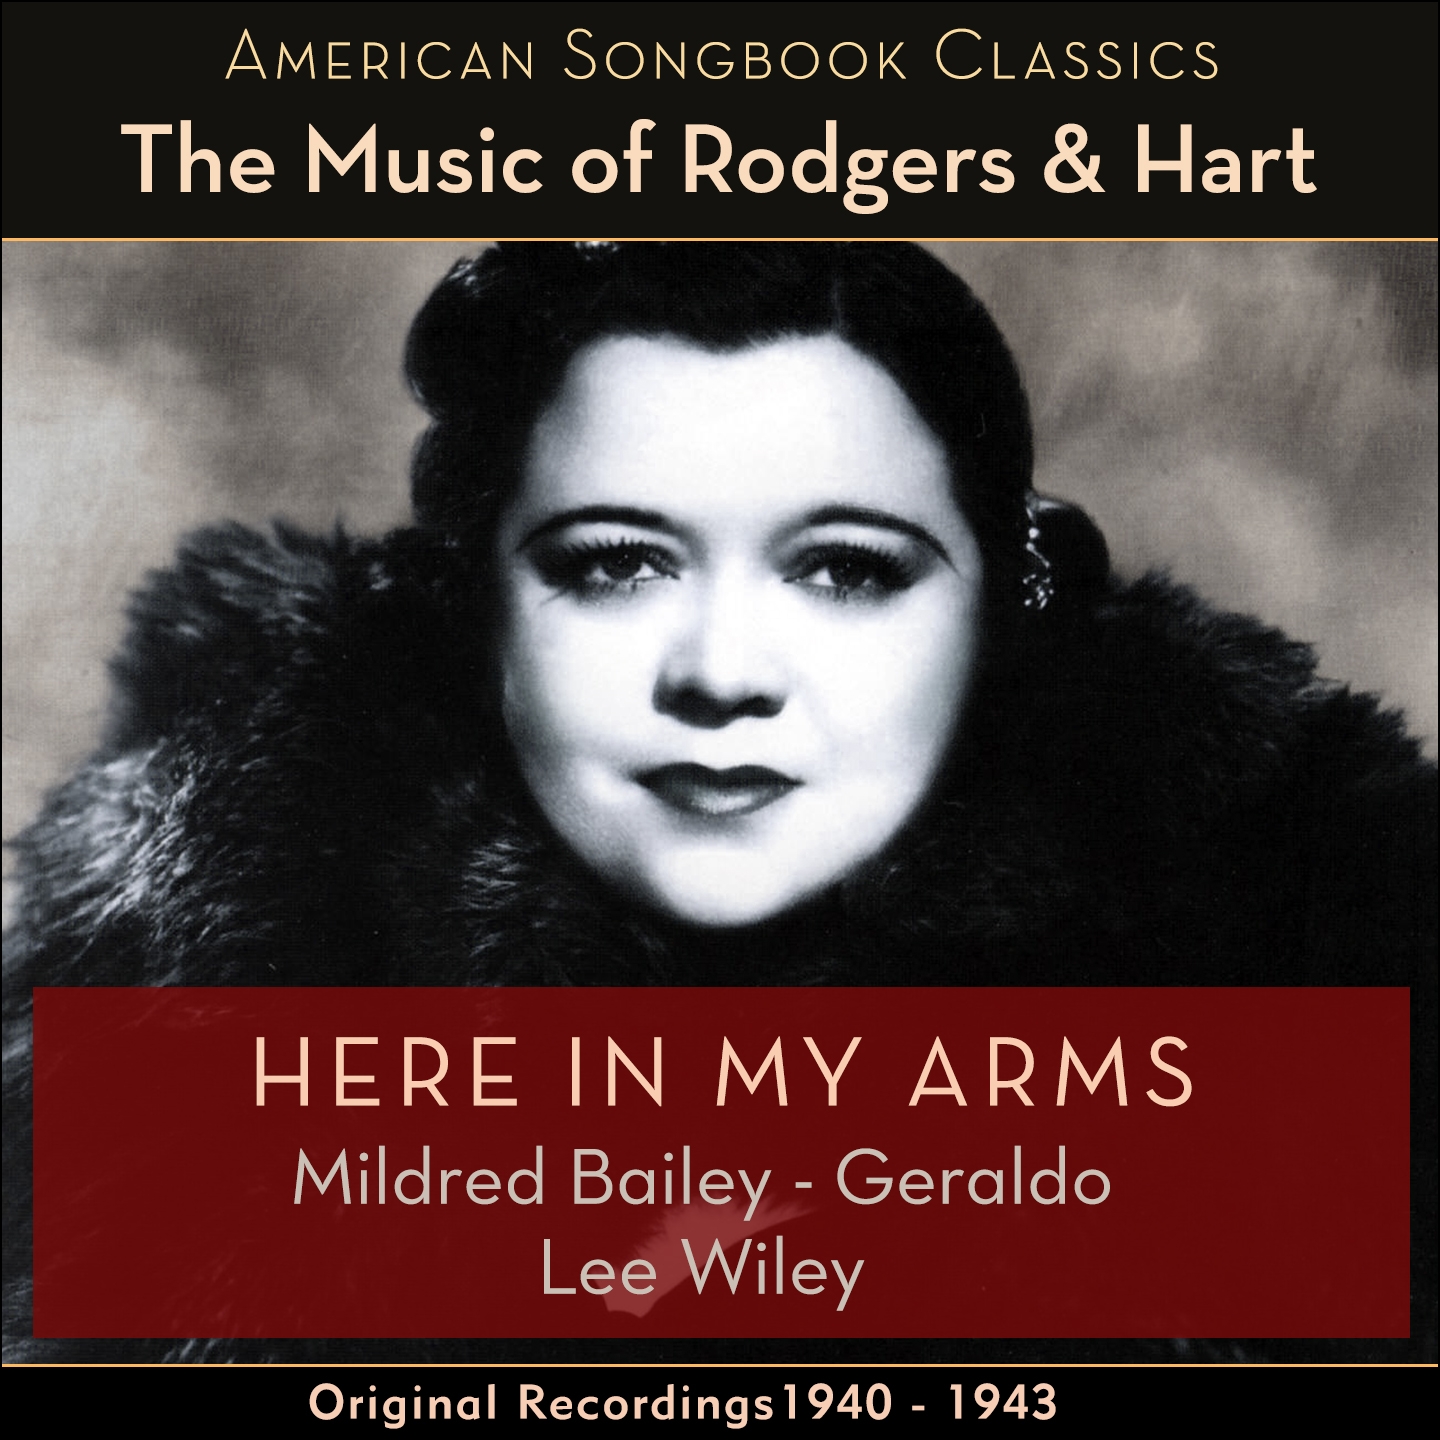 Here In My Arms (The Music Of Rodgers & Hart - Original Recordings 1940 - 1943)